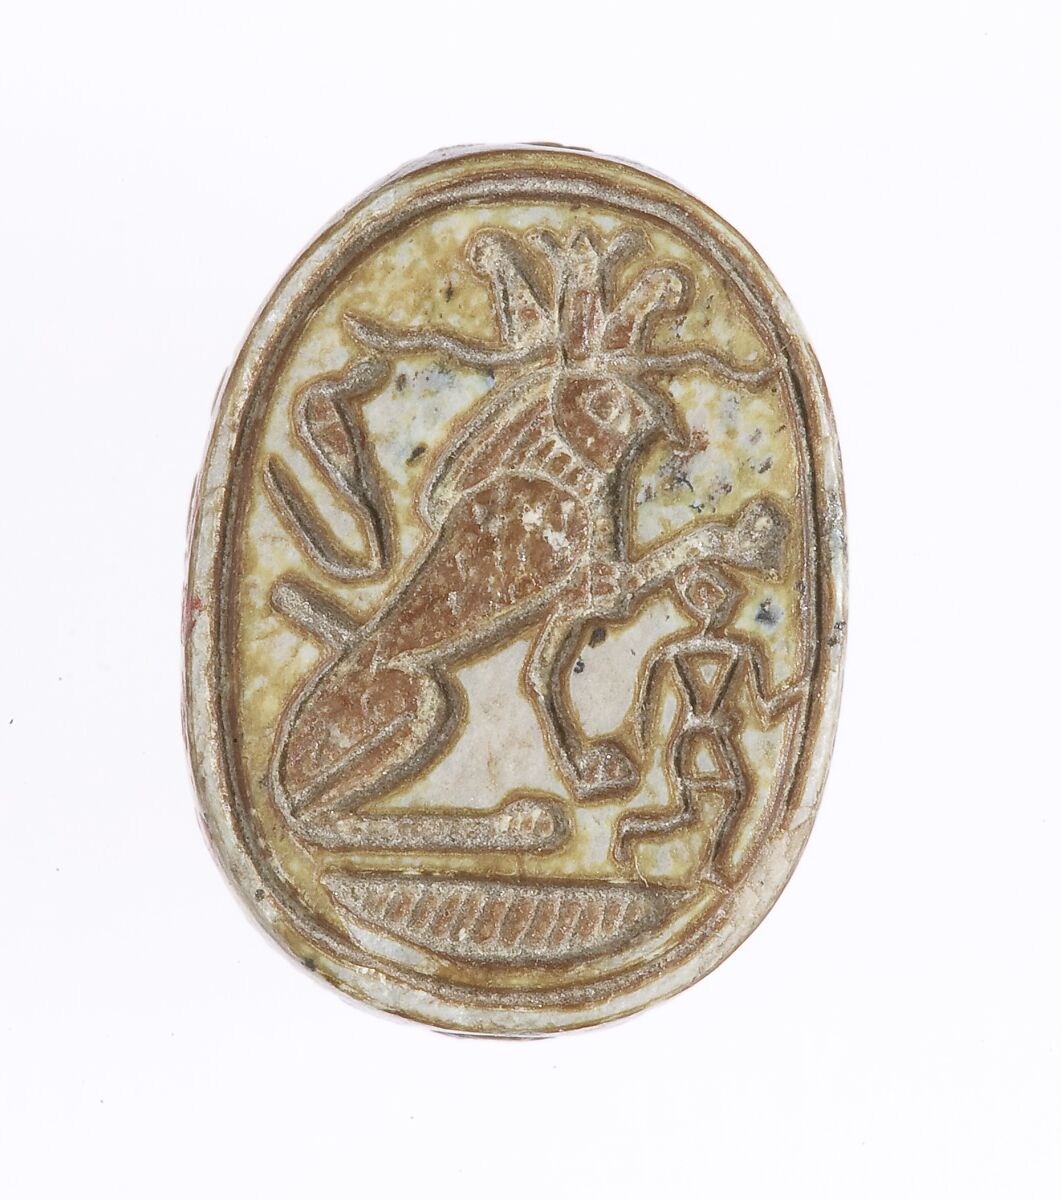 Scarab Inscribed With a Protective Motif, Glazed steatite 